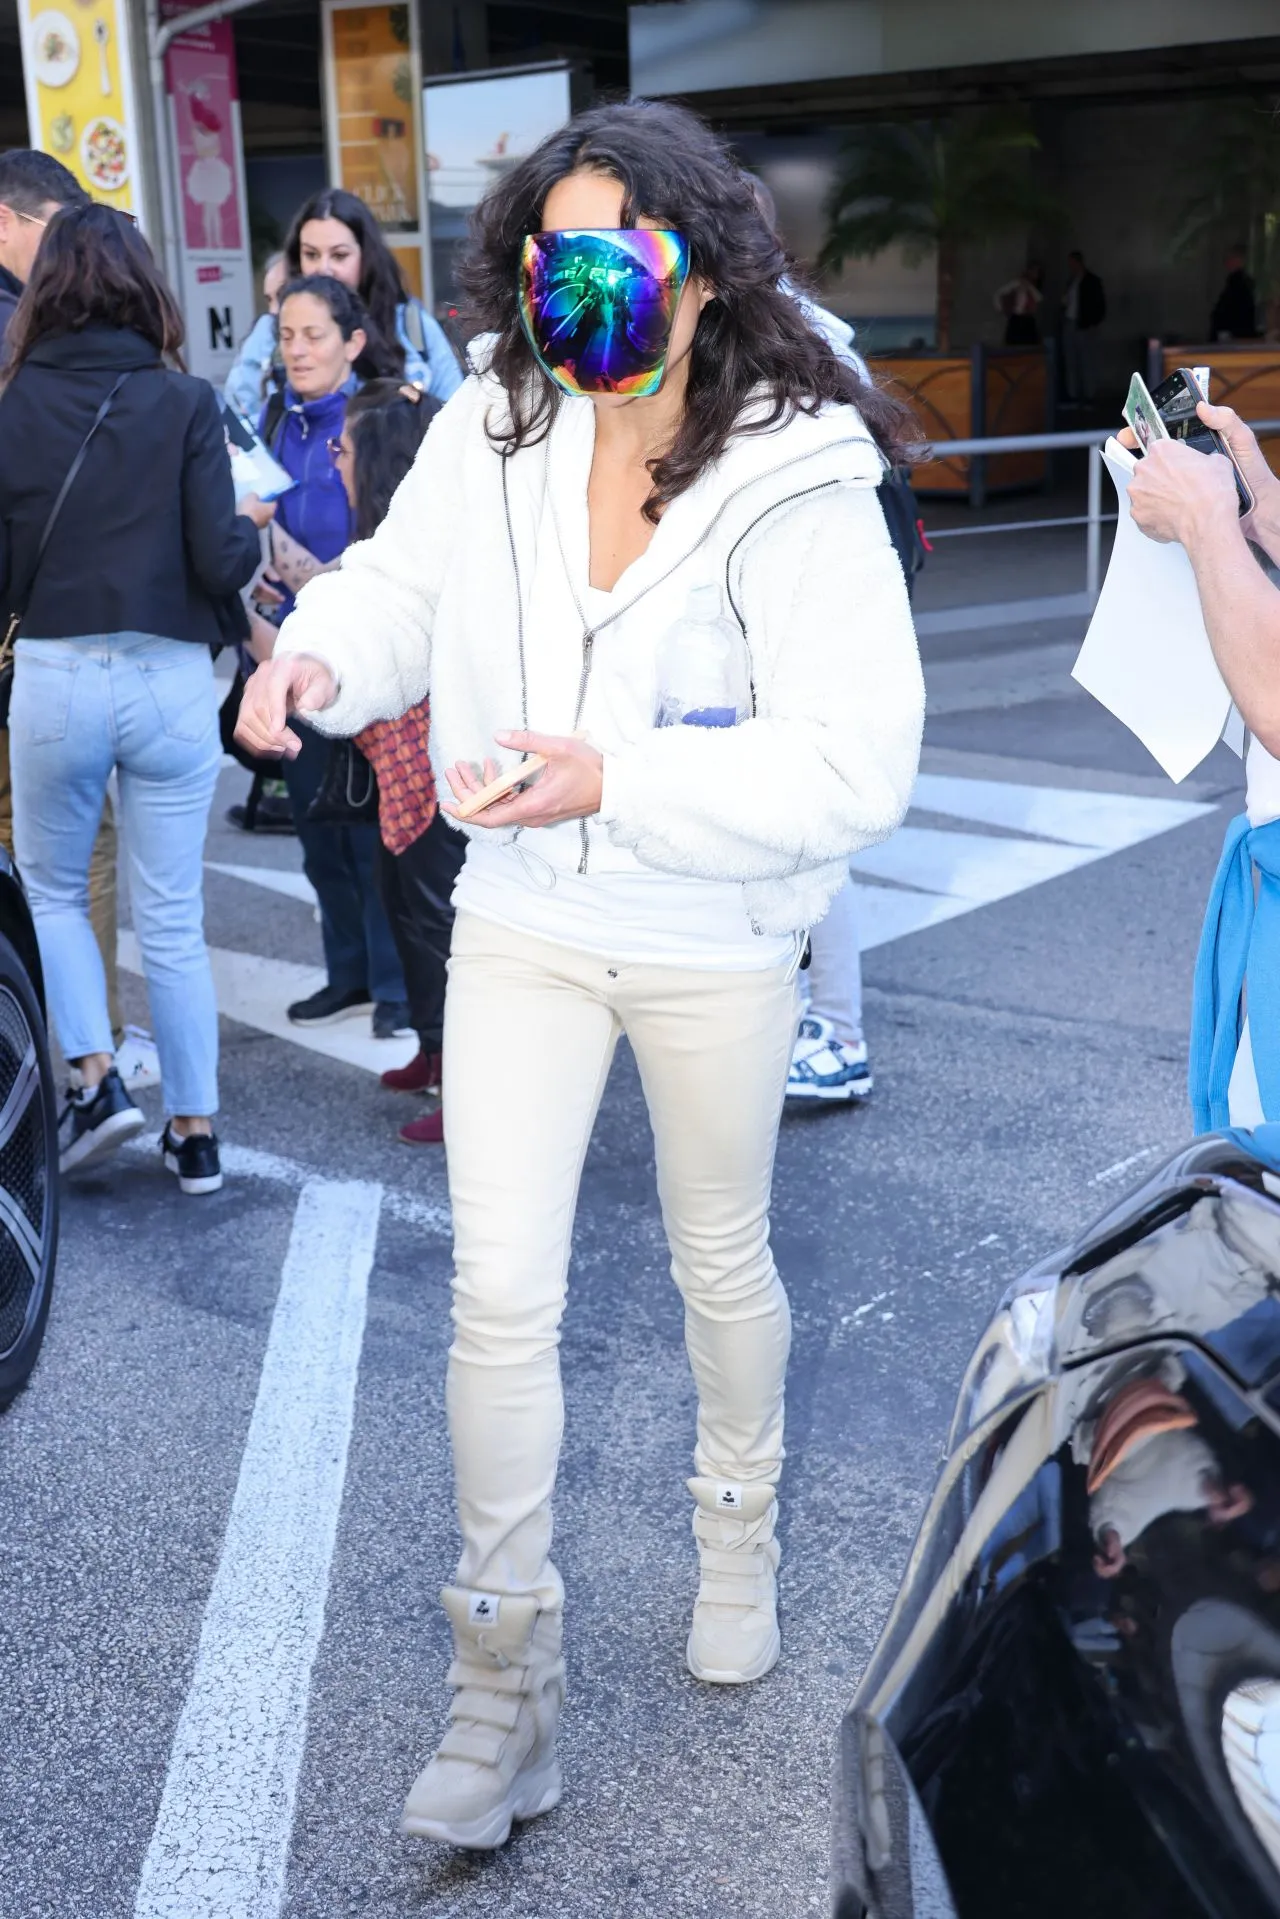 MICHELLE RODRIGUEZ AND CARMEN VANDENBERG AT NICE AIRPORT